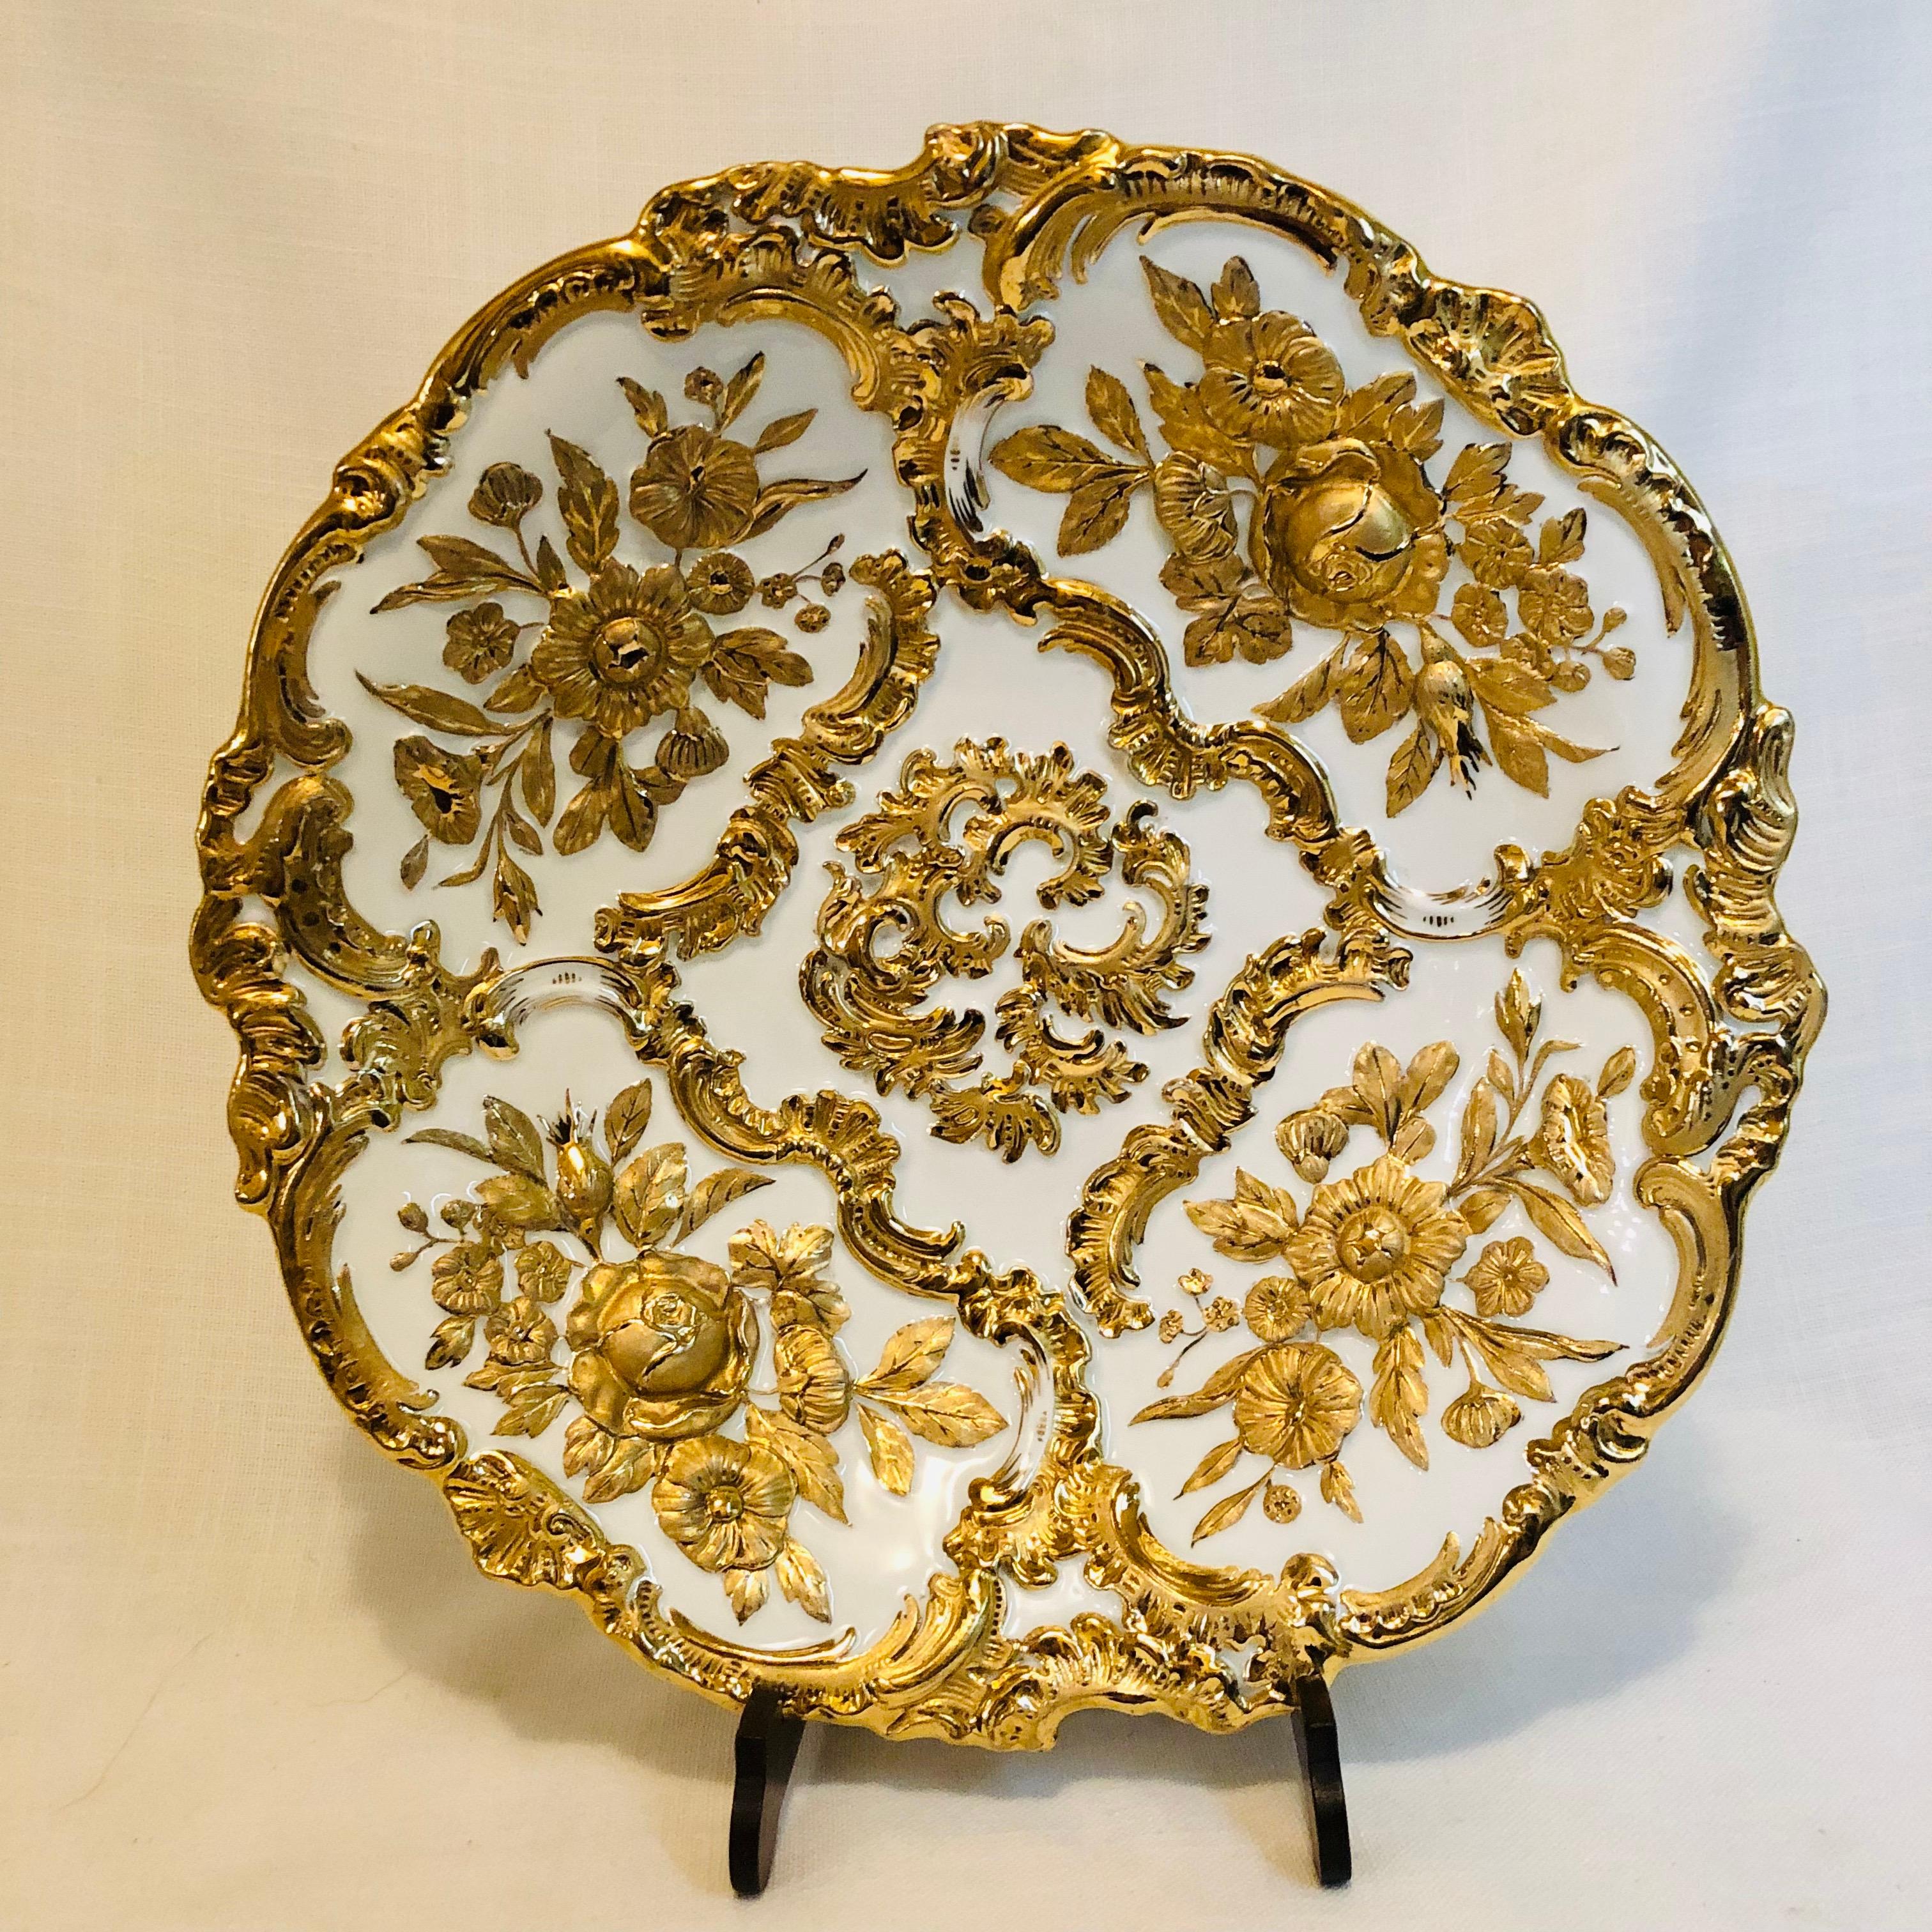 Rococo Meissen Charger With Raised Gilded Flowers & Leaves and Elaborate Gilded Accents